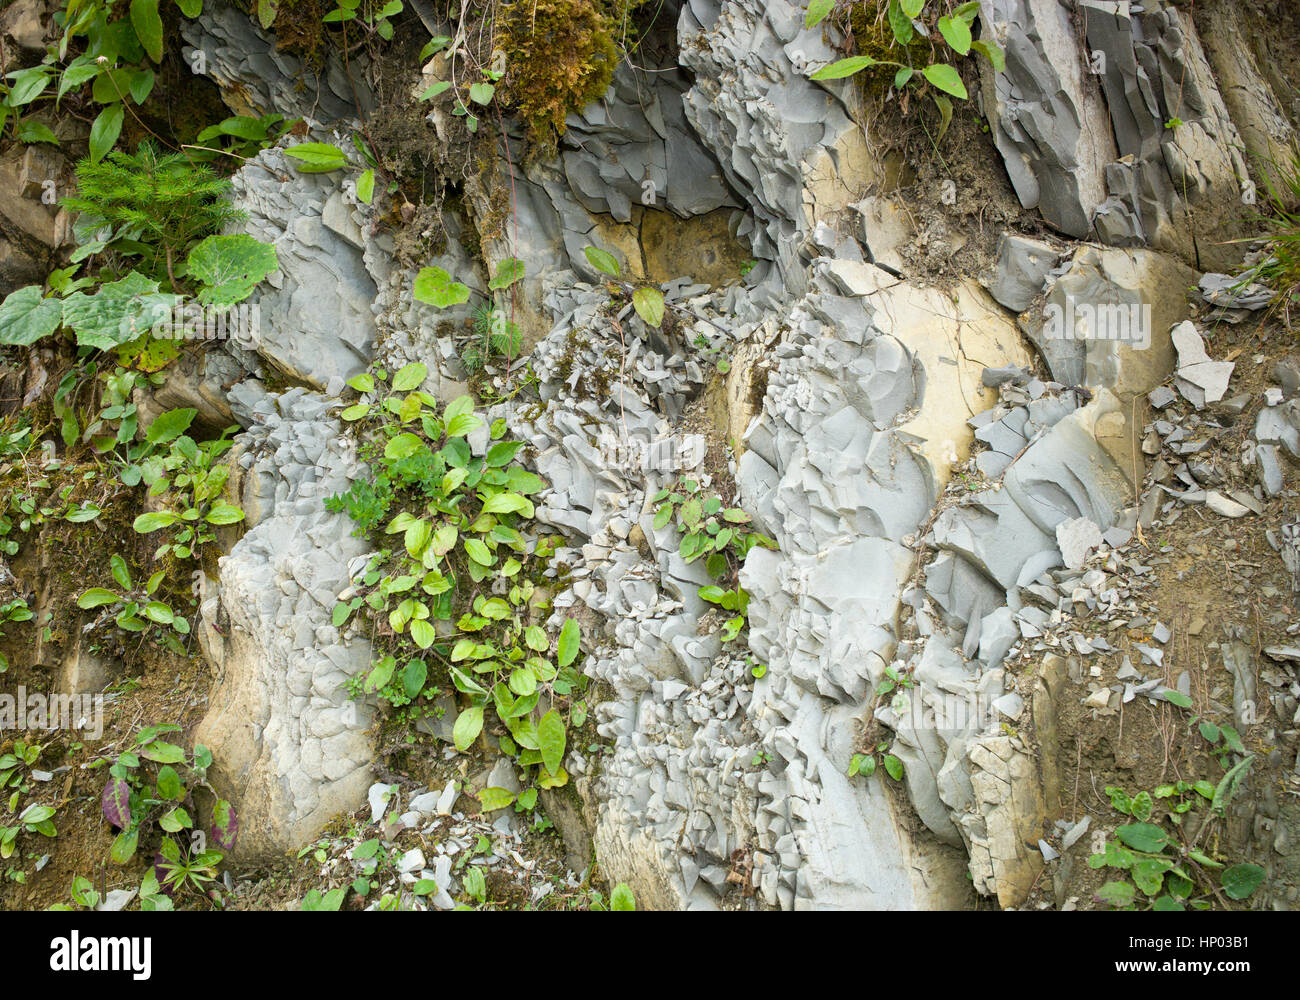 Fractured flysch rock, Ammergau Alps, Bavaria, Germany Stock Photo